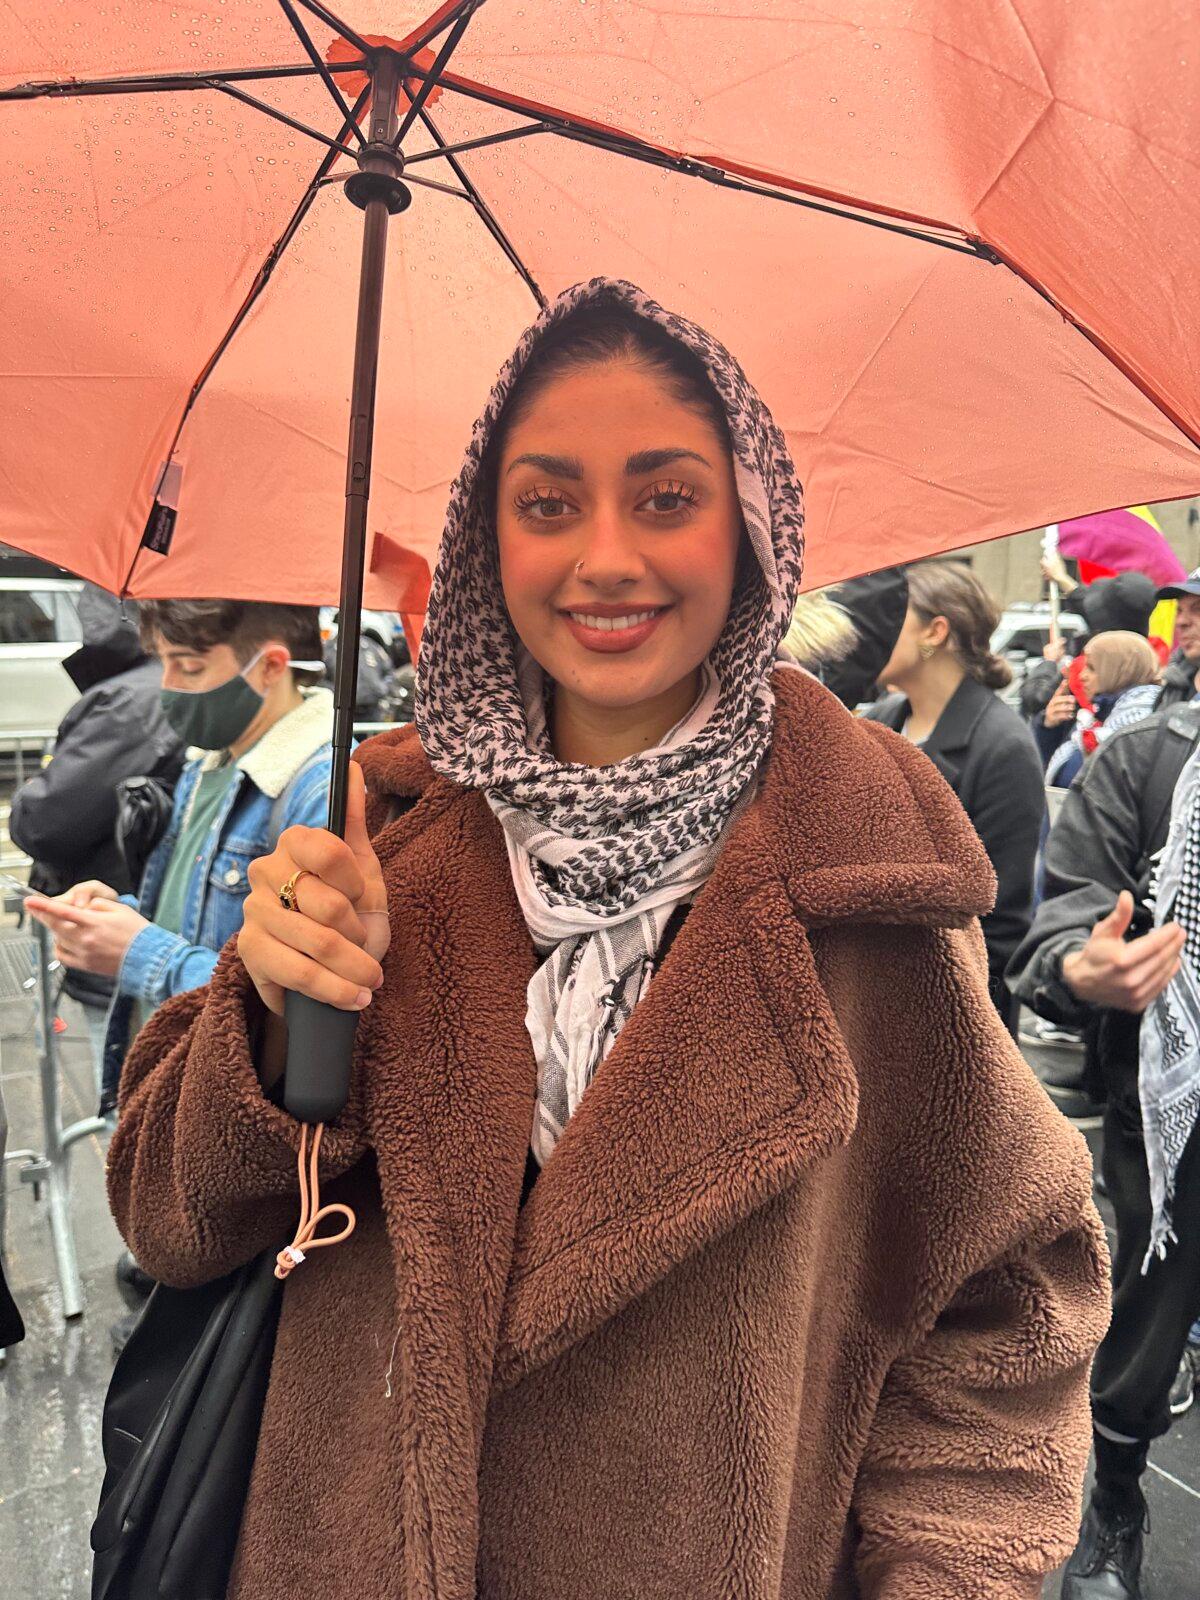 Arij Raja attends the "Abandon Biden" rally in front of Radio City Music Hall in New York on March 28, 2024. (Juliette Fairley/The Epoch Times)